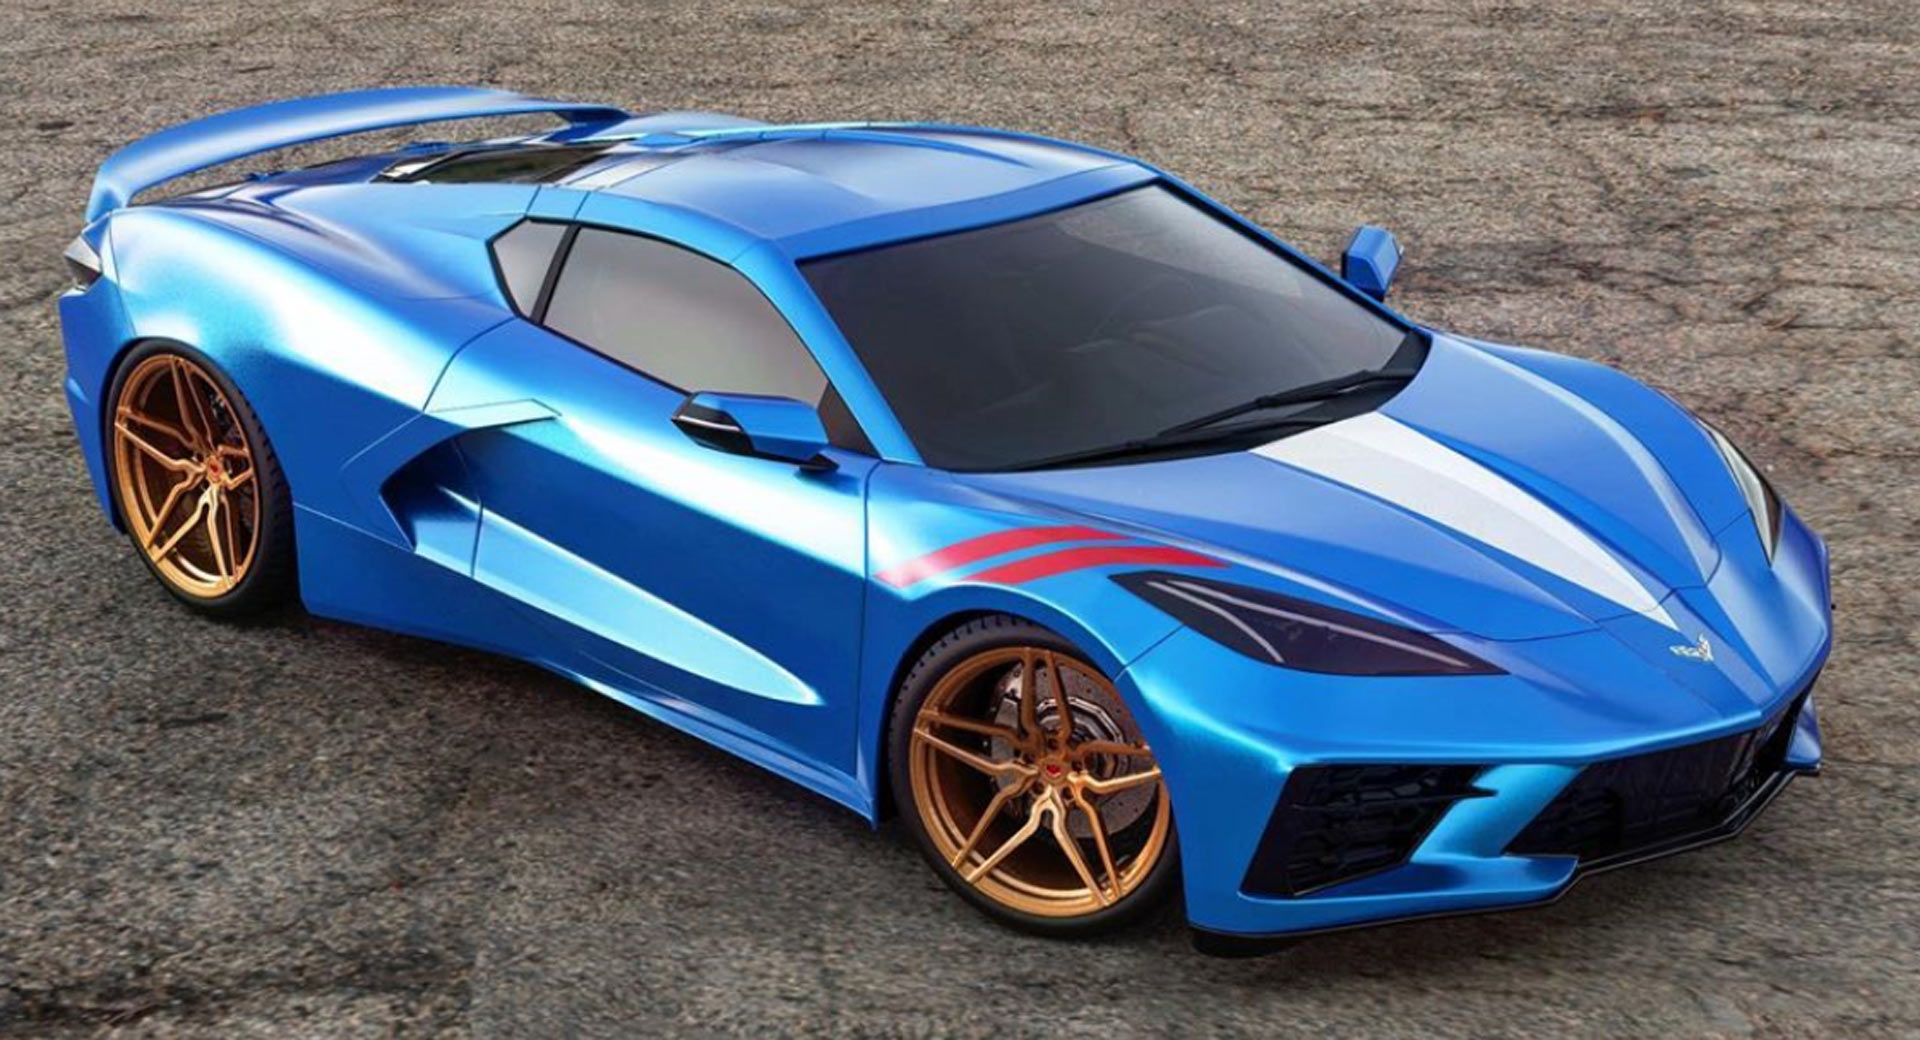 2020 Chevrolet Corvette Grand Sport Is The Model No One Is Talking